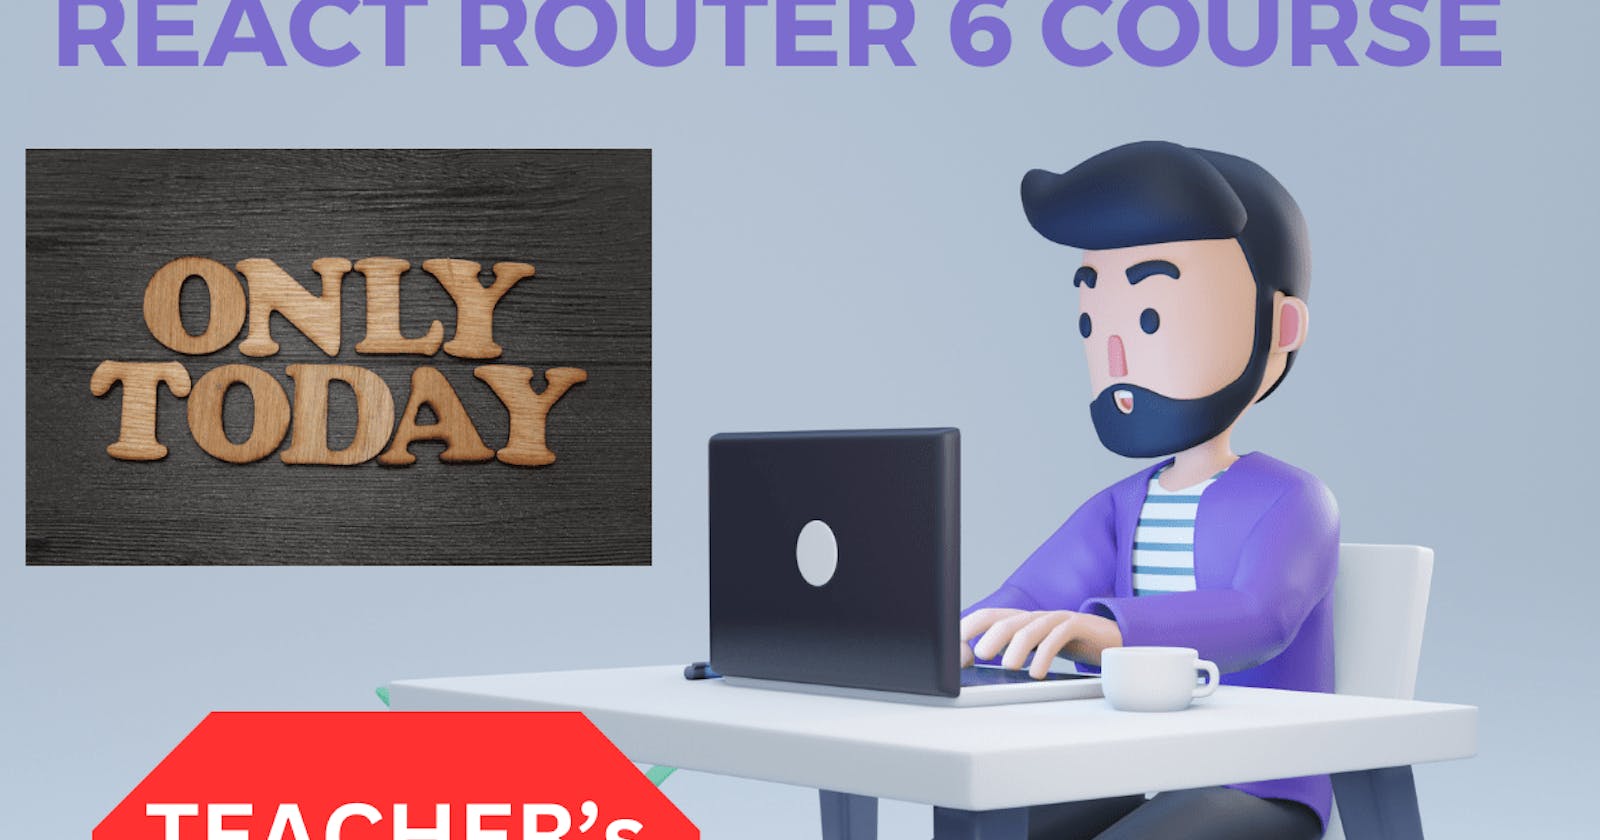 Get FREE Access to My Paid React Router 6 Course